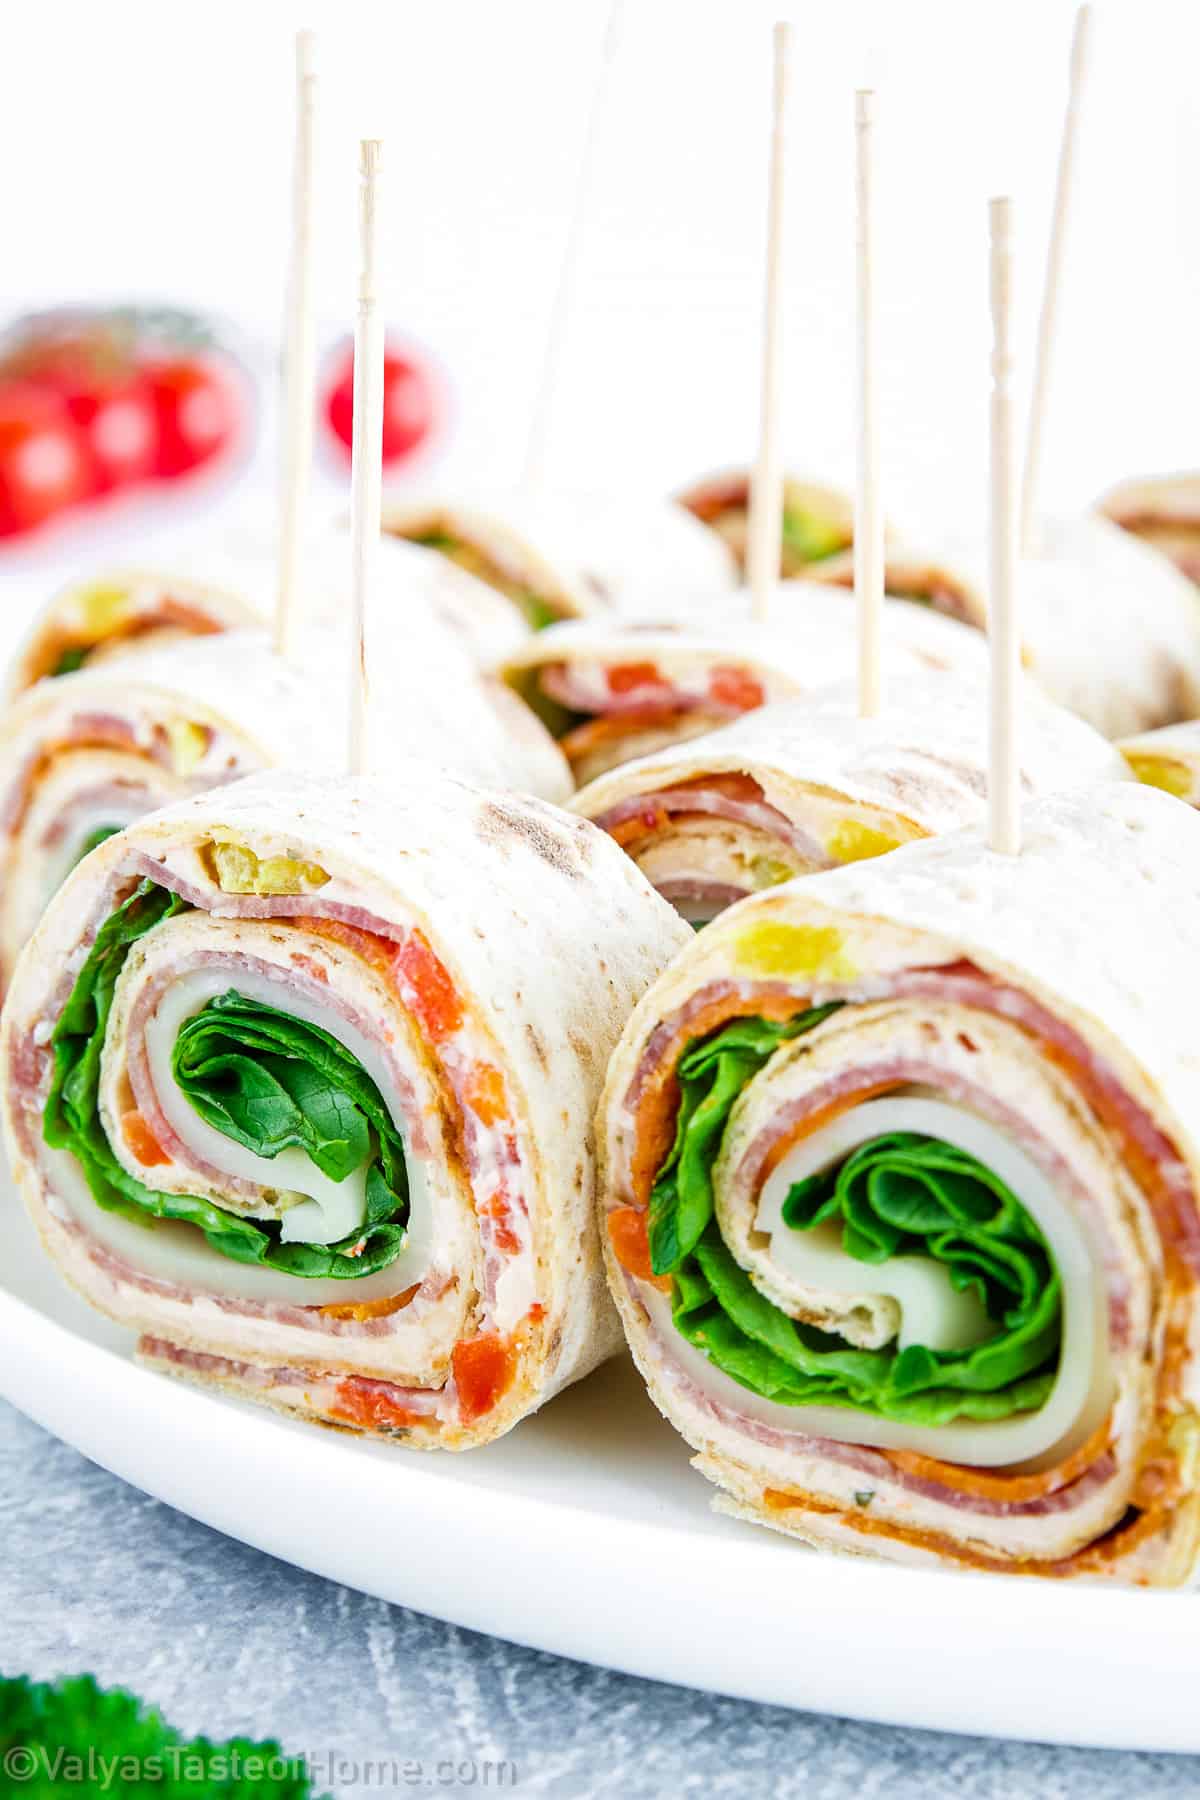 Italian pinwheels are a delicious appetizer made with tortilla, cheese, and various fillings such as roasted red peppers, salami, pepperonis, and cheese. 